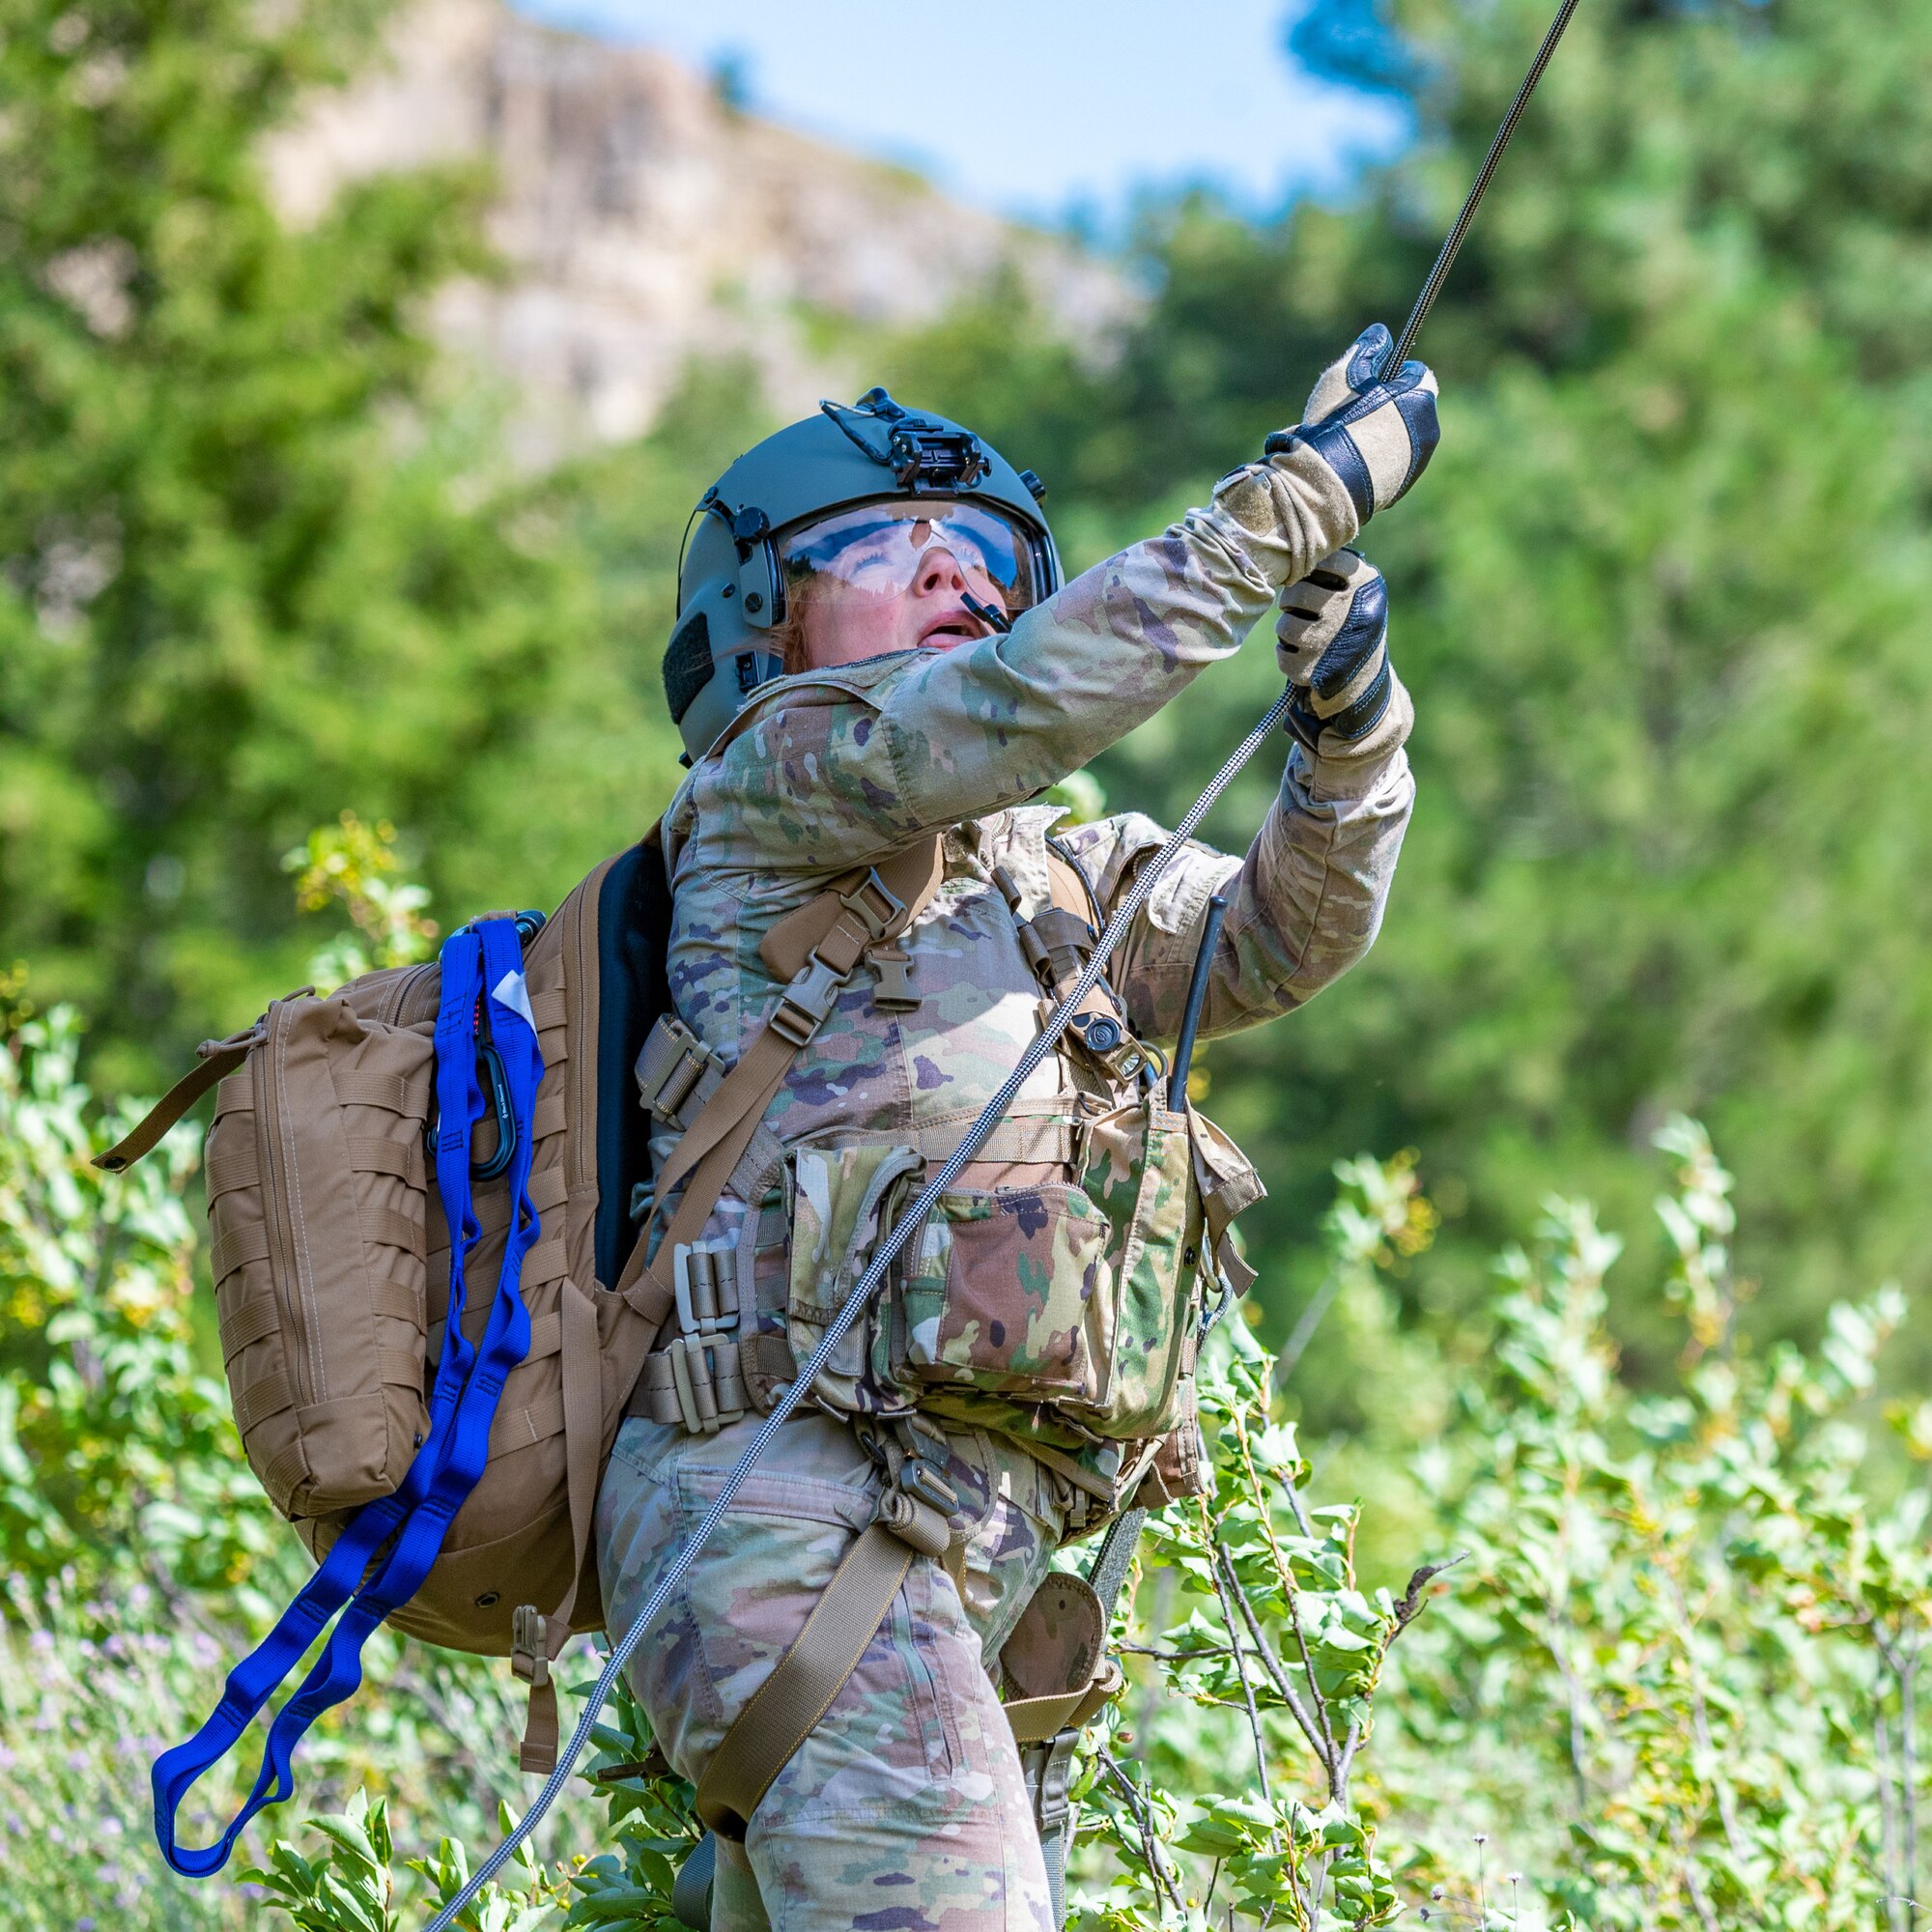 Maj. Joyanne Tesei, 341st Medical Group flight doctor, holds the rope attached to the stokes litter during a search and rescue exercise August 3, 2022, in Sluice Boxes State Park.